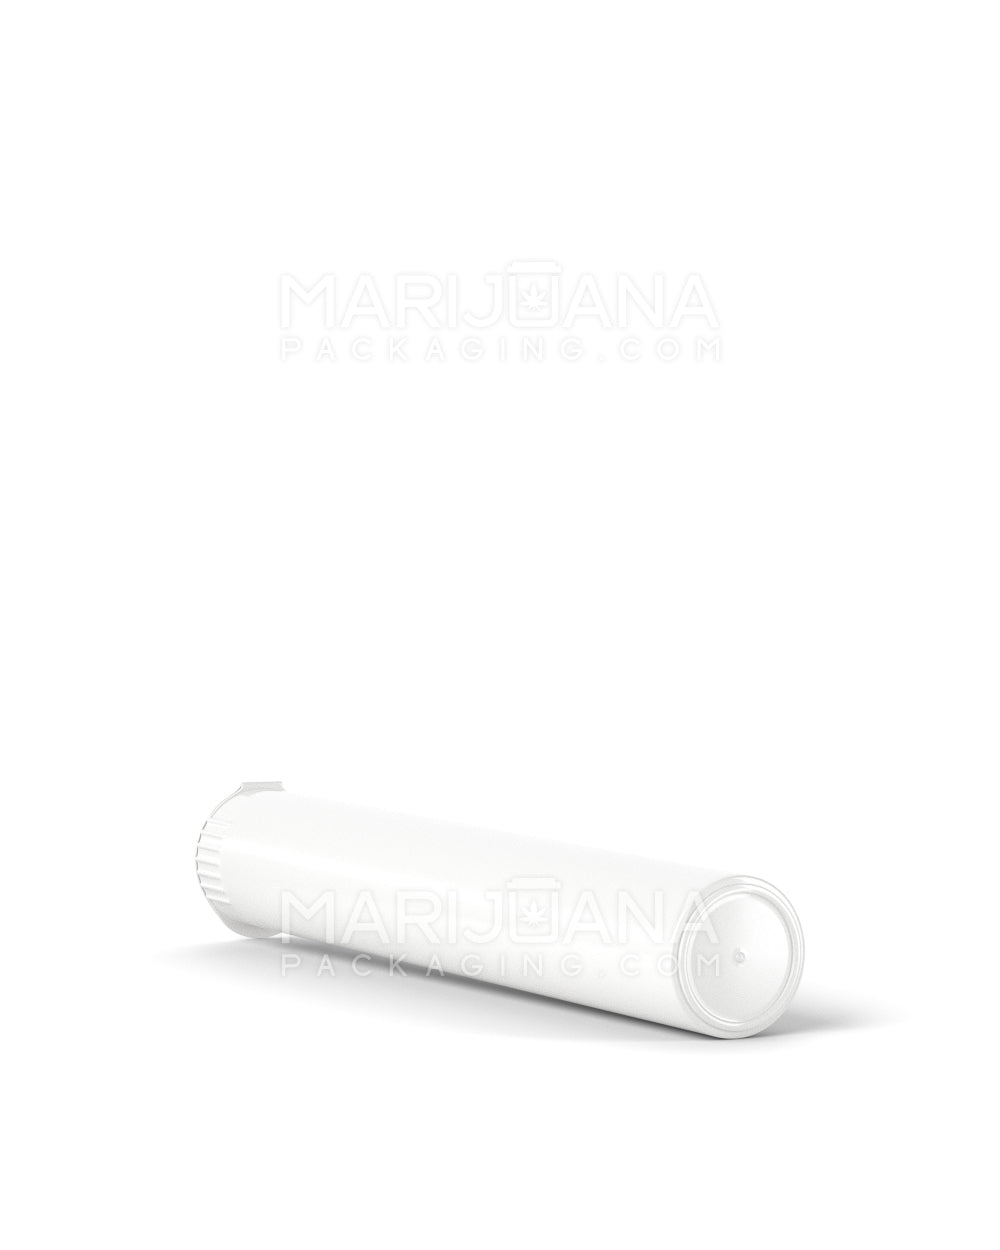 Child Resistant | King Size Pop Top Opaque Plastic Pre-Roll Tubes | 116mm - White - 1000 Count - 6